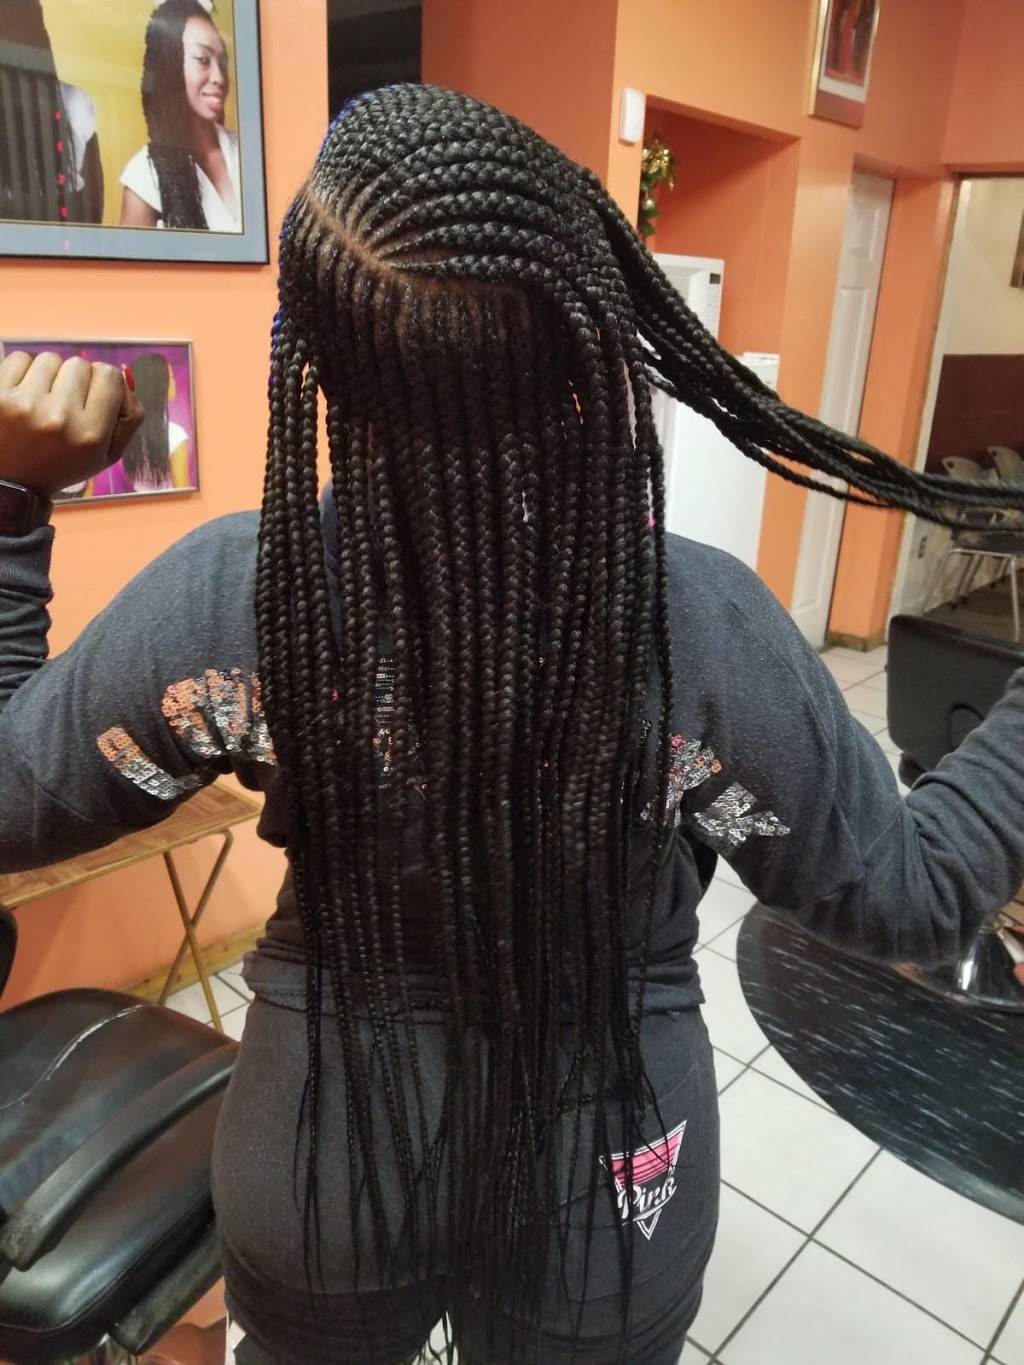 Revelations Two African Hair Braiding | 5268 N 76th St Suite 102, Milwaukee, WI 53218, USA | Phone: (414) 234-1398